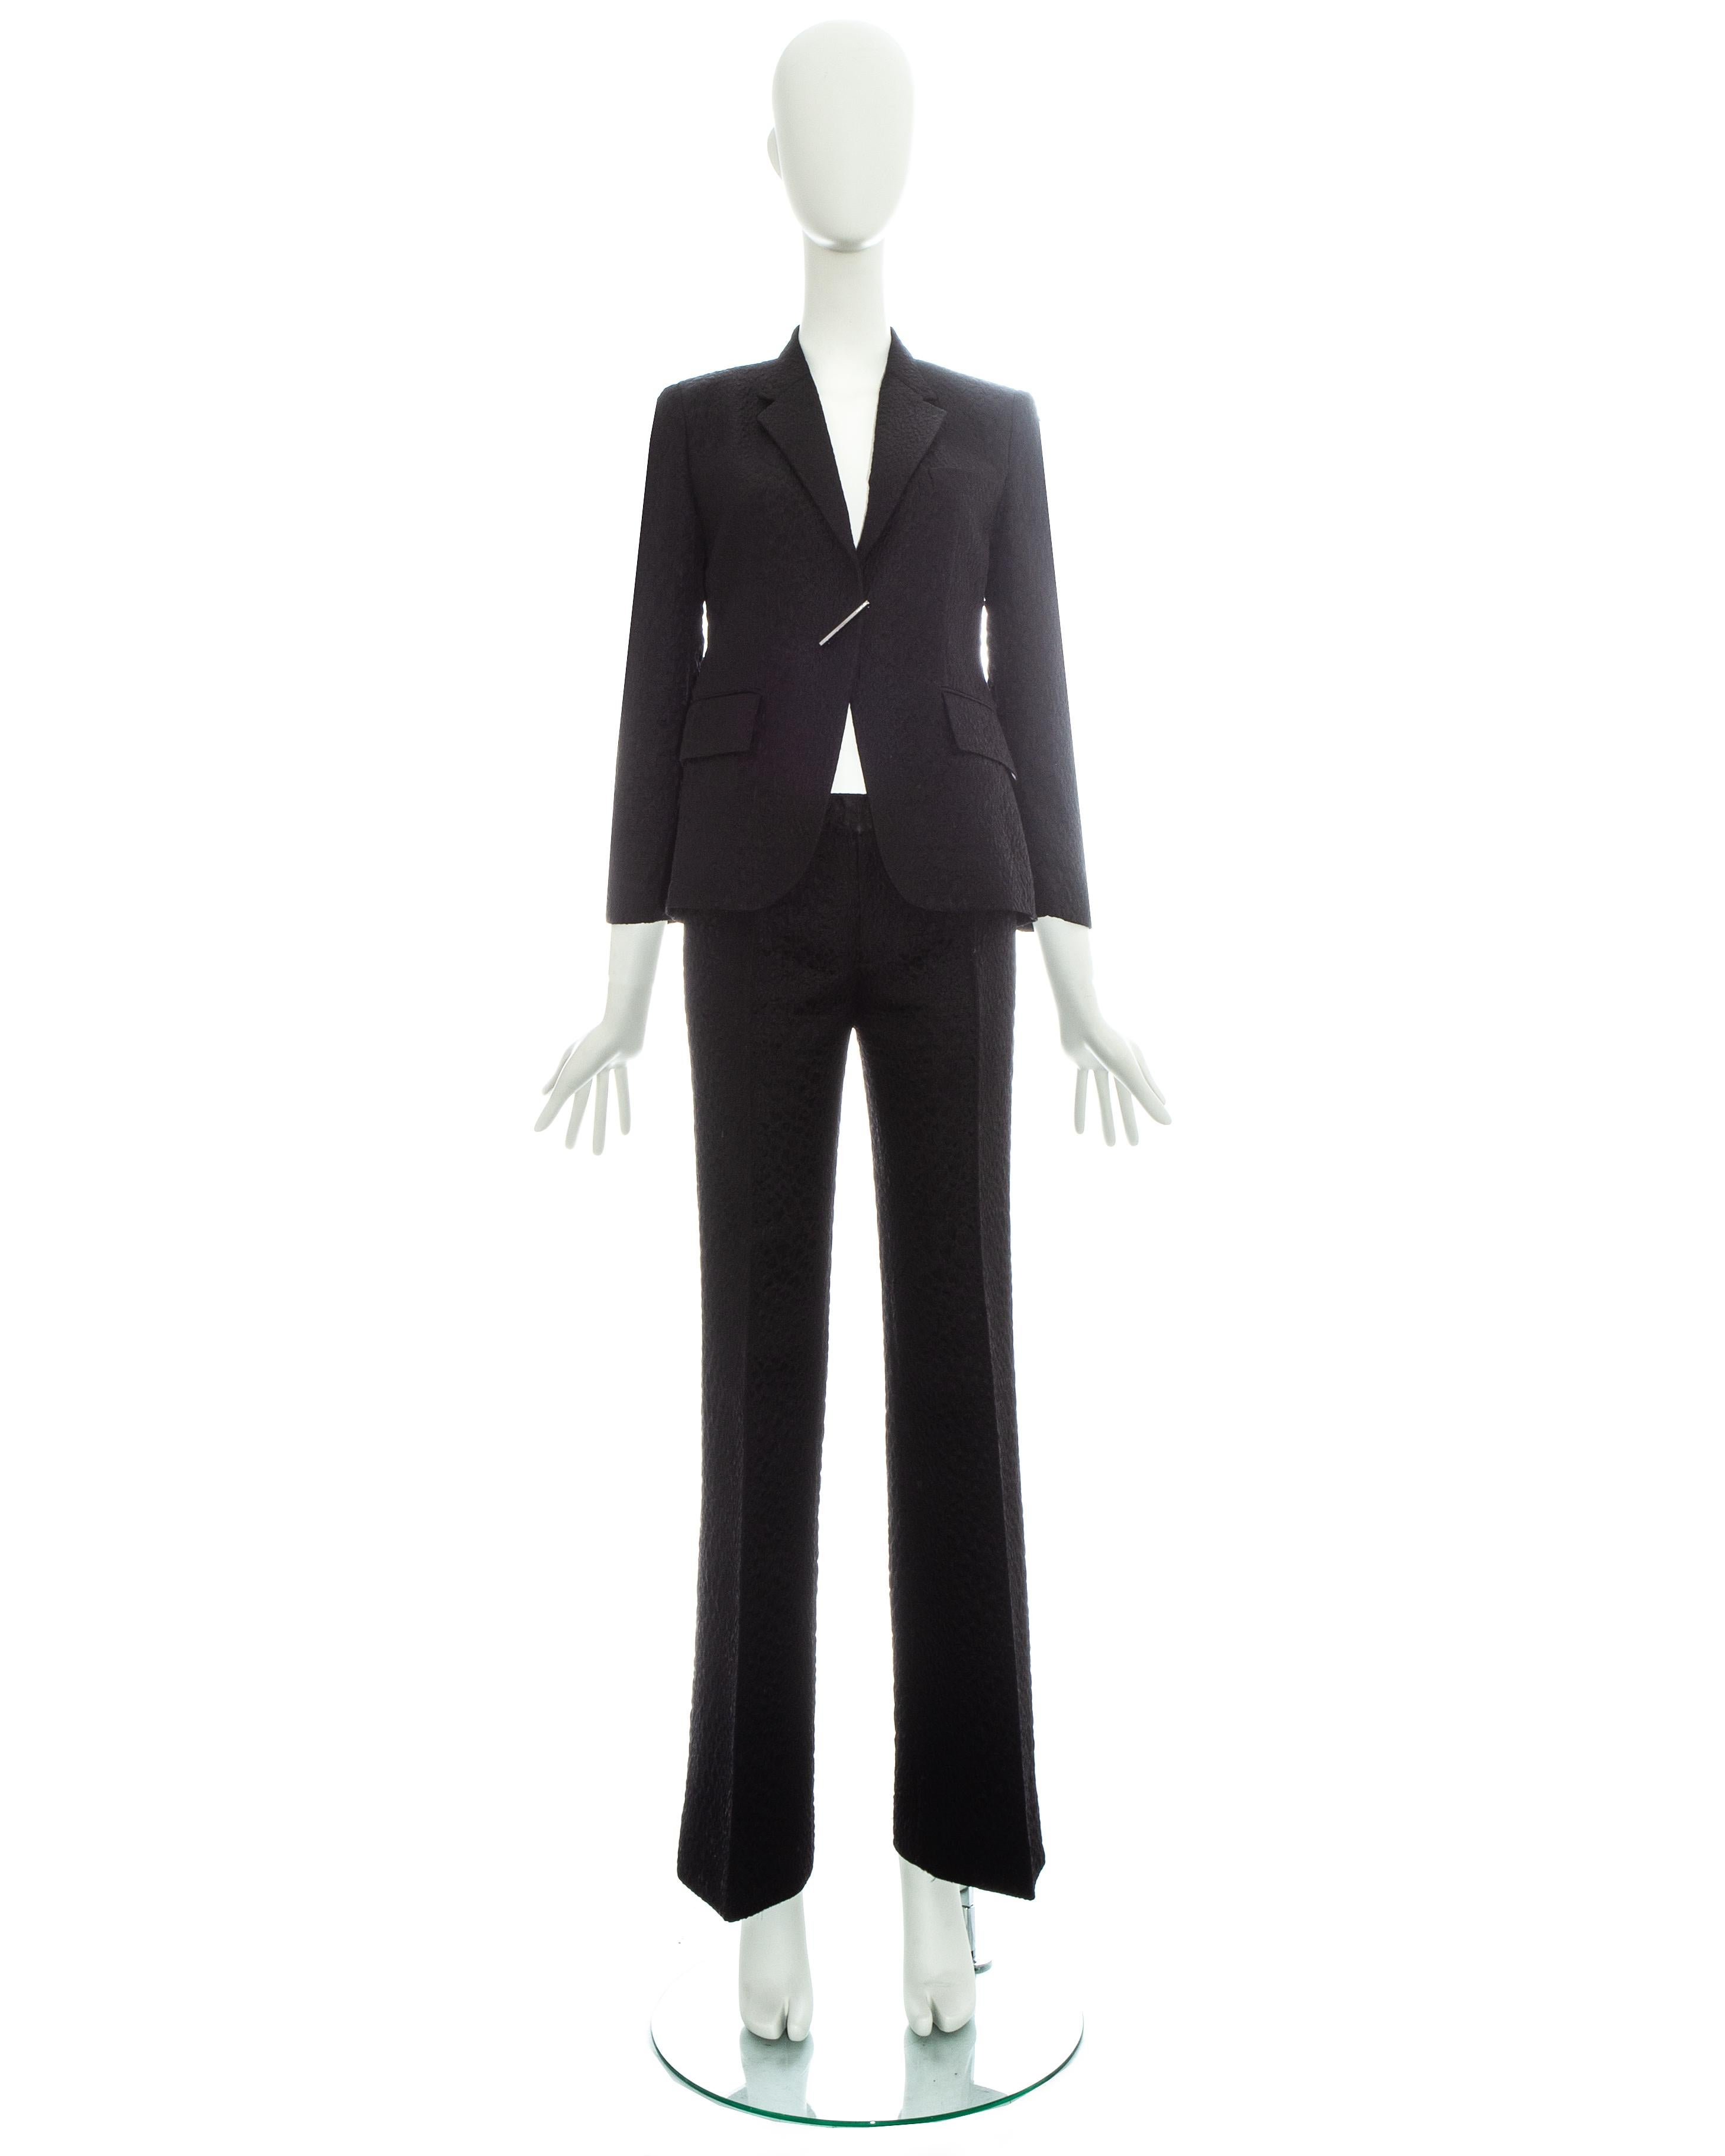 Gucci by Tom Ford black croc embossed flared pant suit with silver diamanté clasp fastening.

Spring-Summer 2000